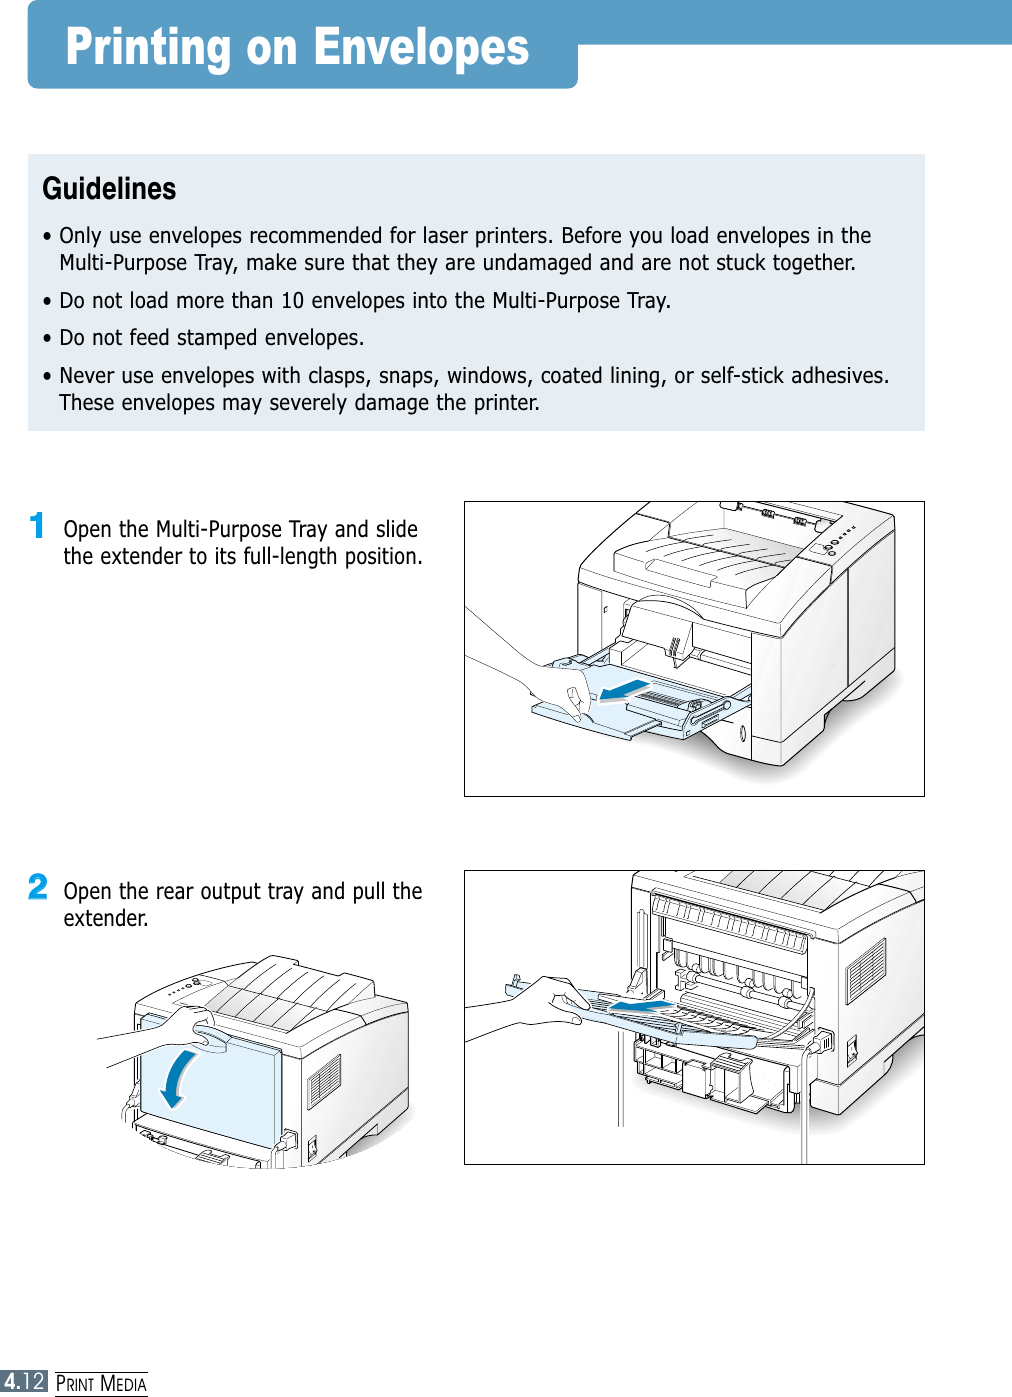 PRINT MEDIA4.12Printing on EnvelopesGuidelines• Only use envelopes recommended for laser printers. Before you load envelopes in theMulti-Purpose Tray, make sure that they are undamaged and are not stuck together. • Do not load more than 10 envelopes into the Multi-Purpose Tray.• Do not feed stamped envelopes.• Never use envelopes with clasps, snaps, windows, coated lining, or self-stick adhesives.These envelopes may severely damage the printer.11Open the Multi-Purpose Tray and slidethe extender to its full-length position.22Open the rear output tray and pull theextender.